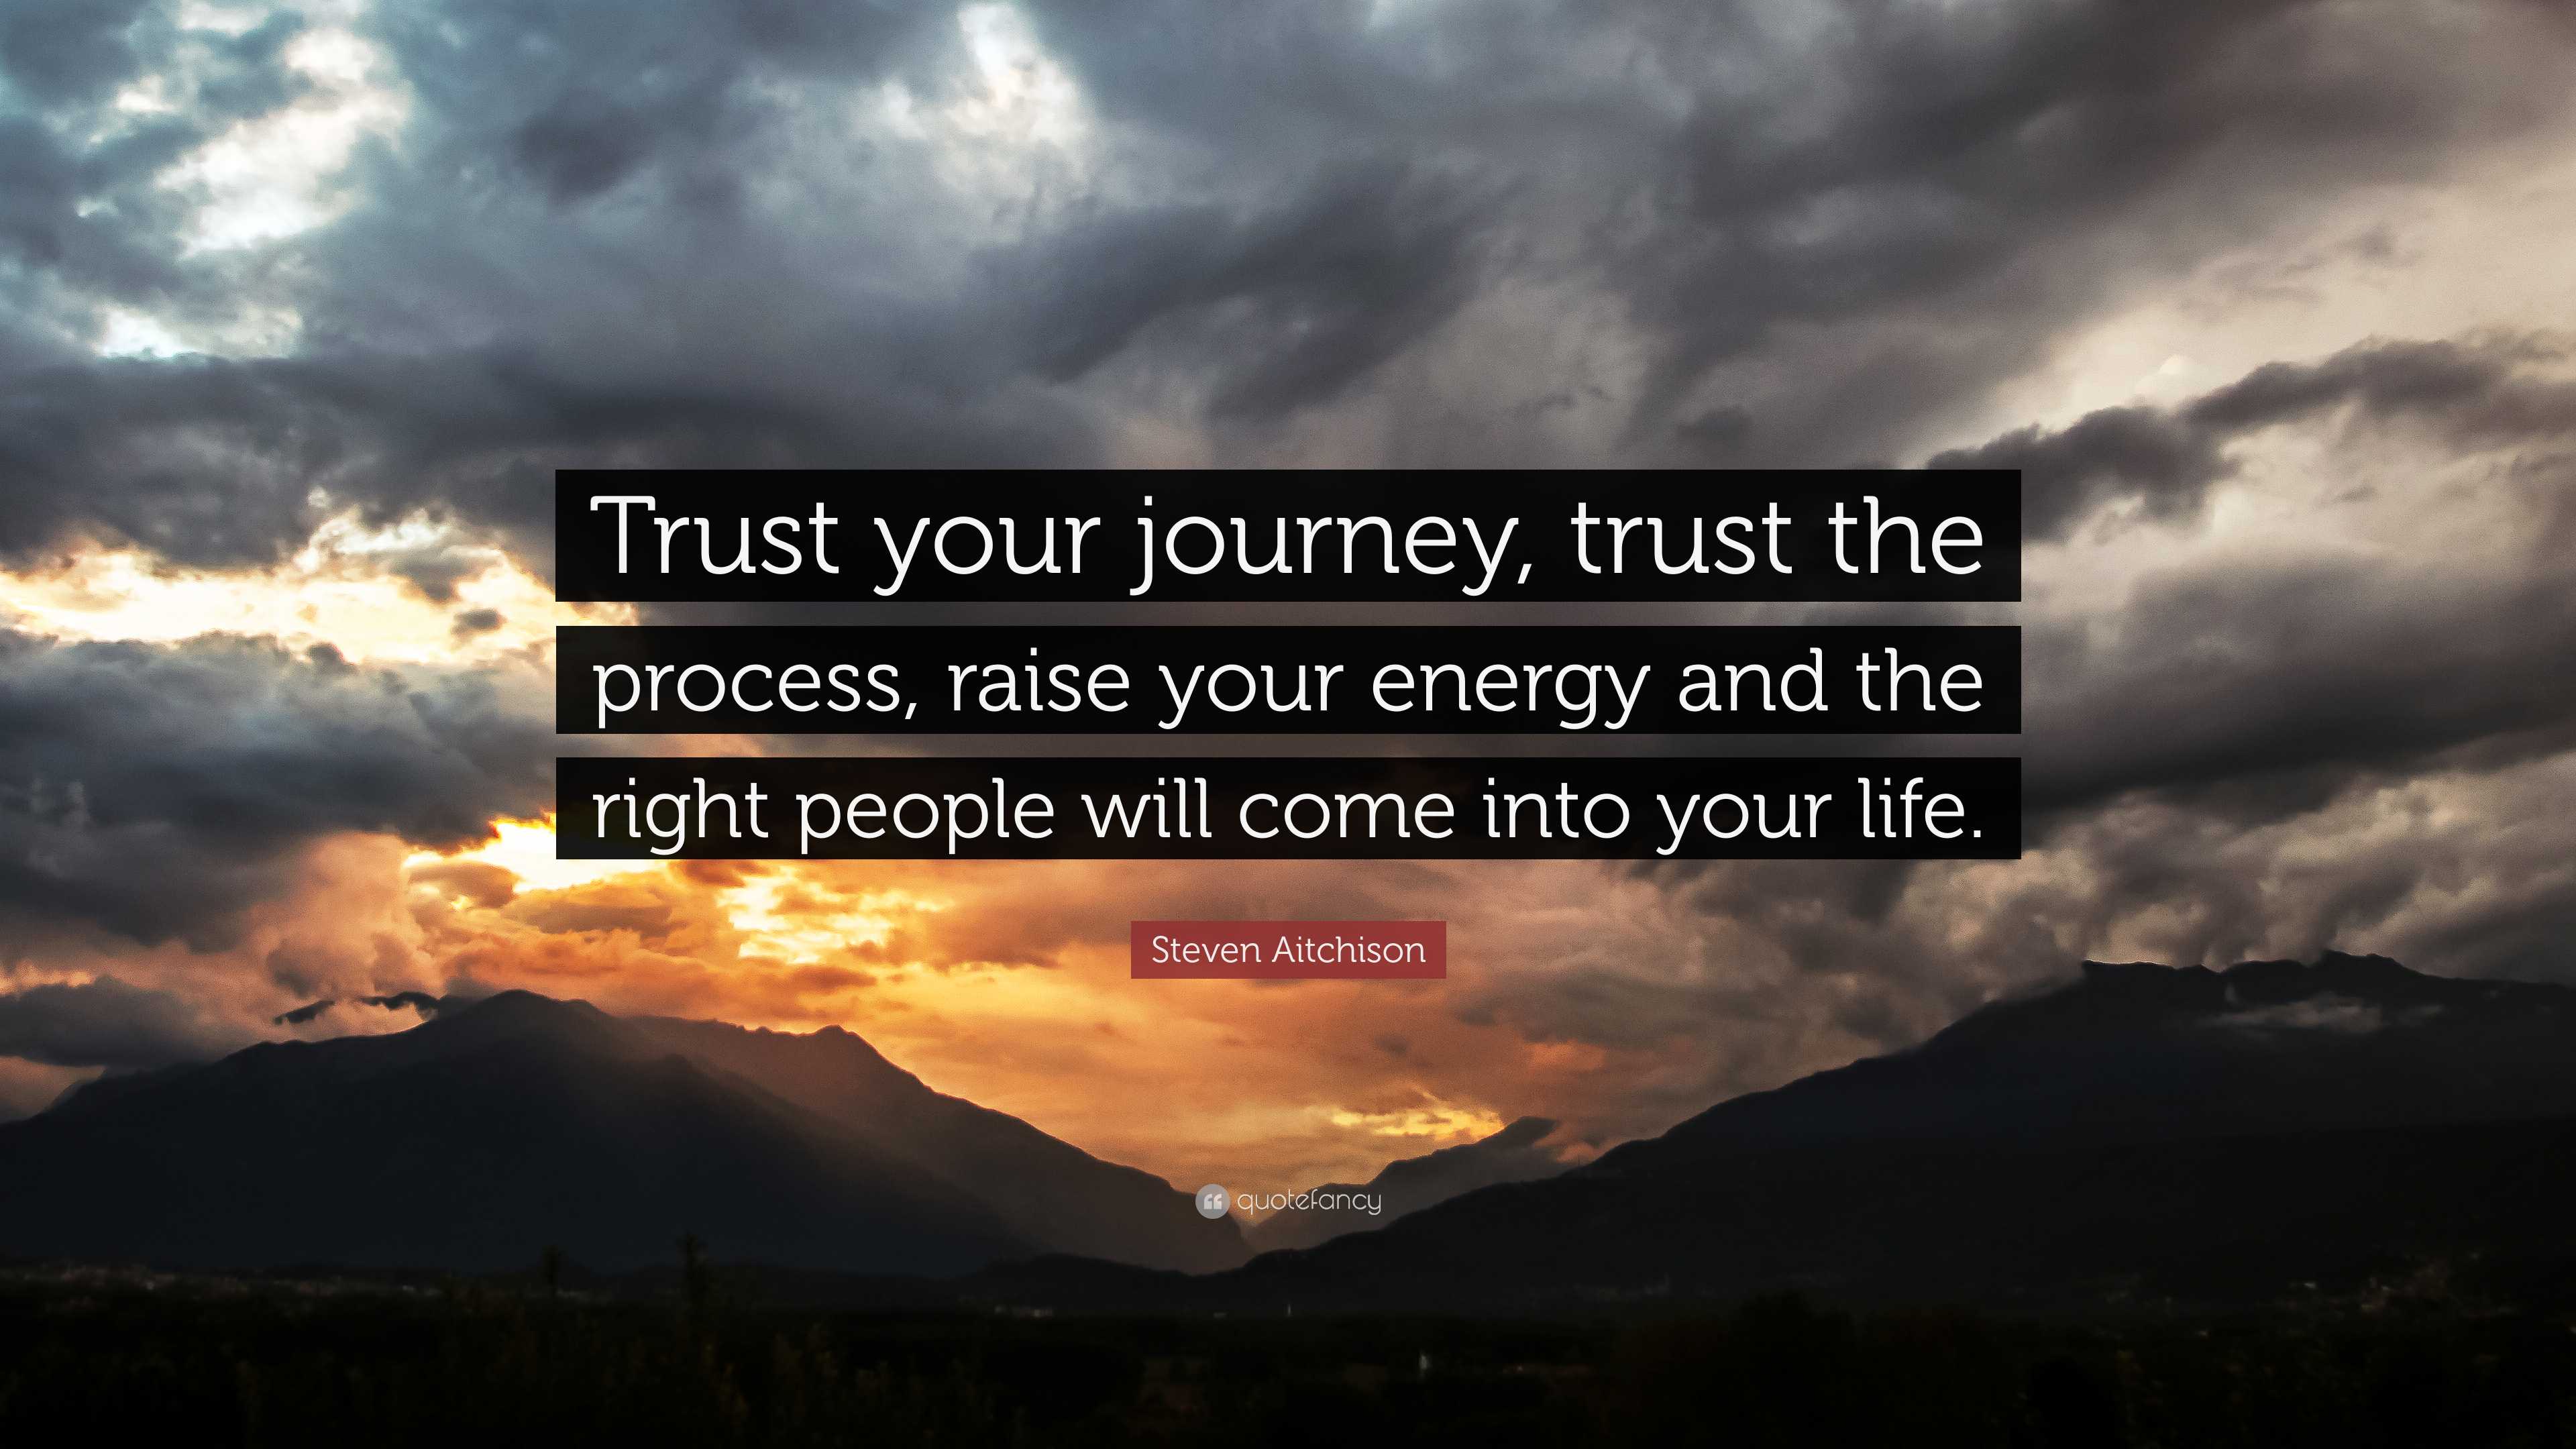 Motivational Quotes - Trust the Process Enjoy the Journey Stock Photo -  Image of motivation, process: 212251908